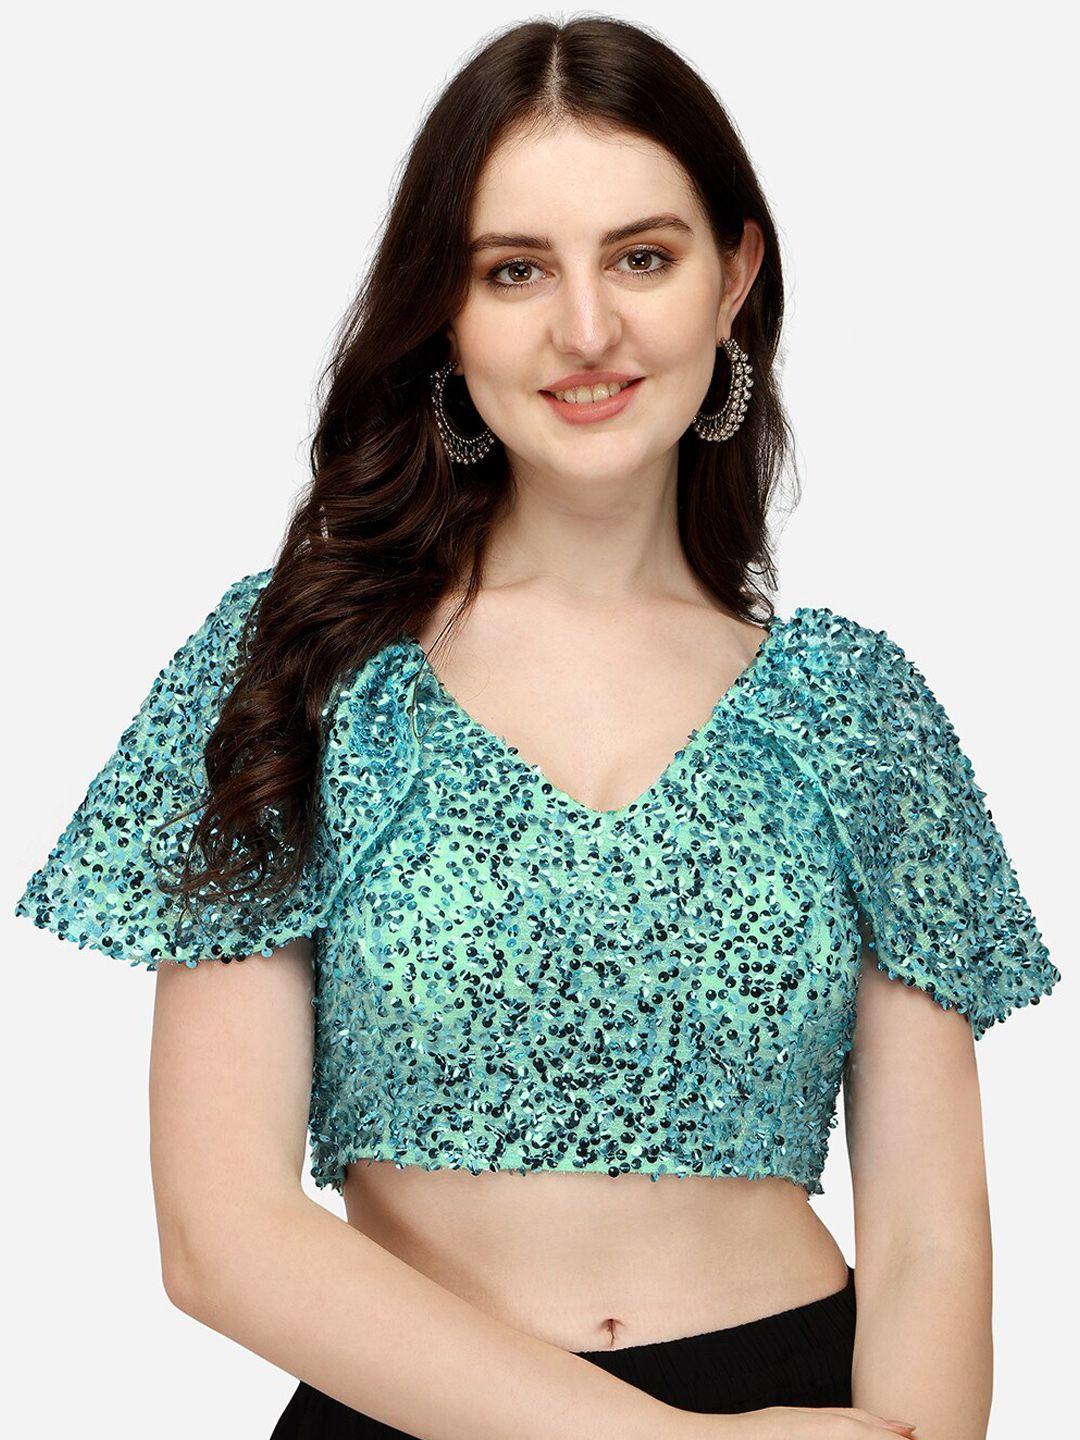 sumaira-tex-turquoise-blue-sequinned-saree-blouse